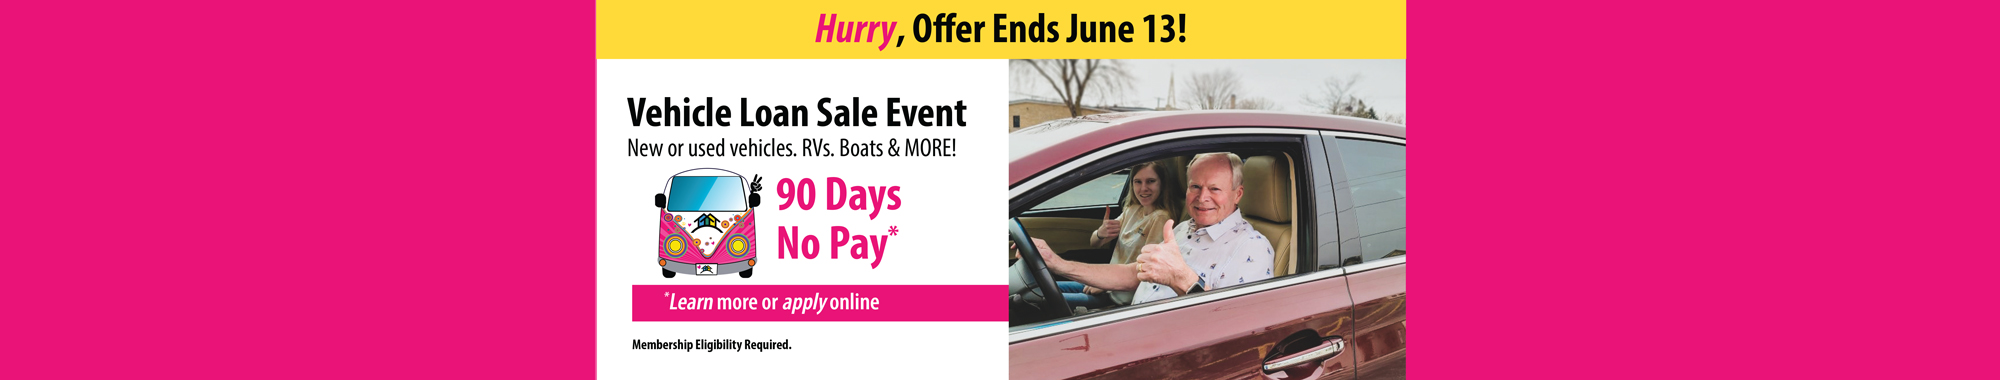 Hurry, Offer Ends June13! Vehicle Loan Sale Event - New or used vehicles. RVs. Boats & MORE! 90 Days No Pay  - Learn more or apply online